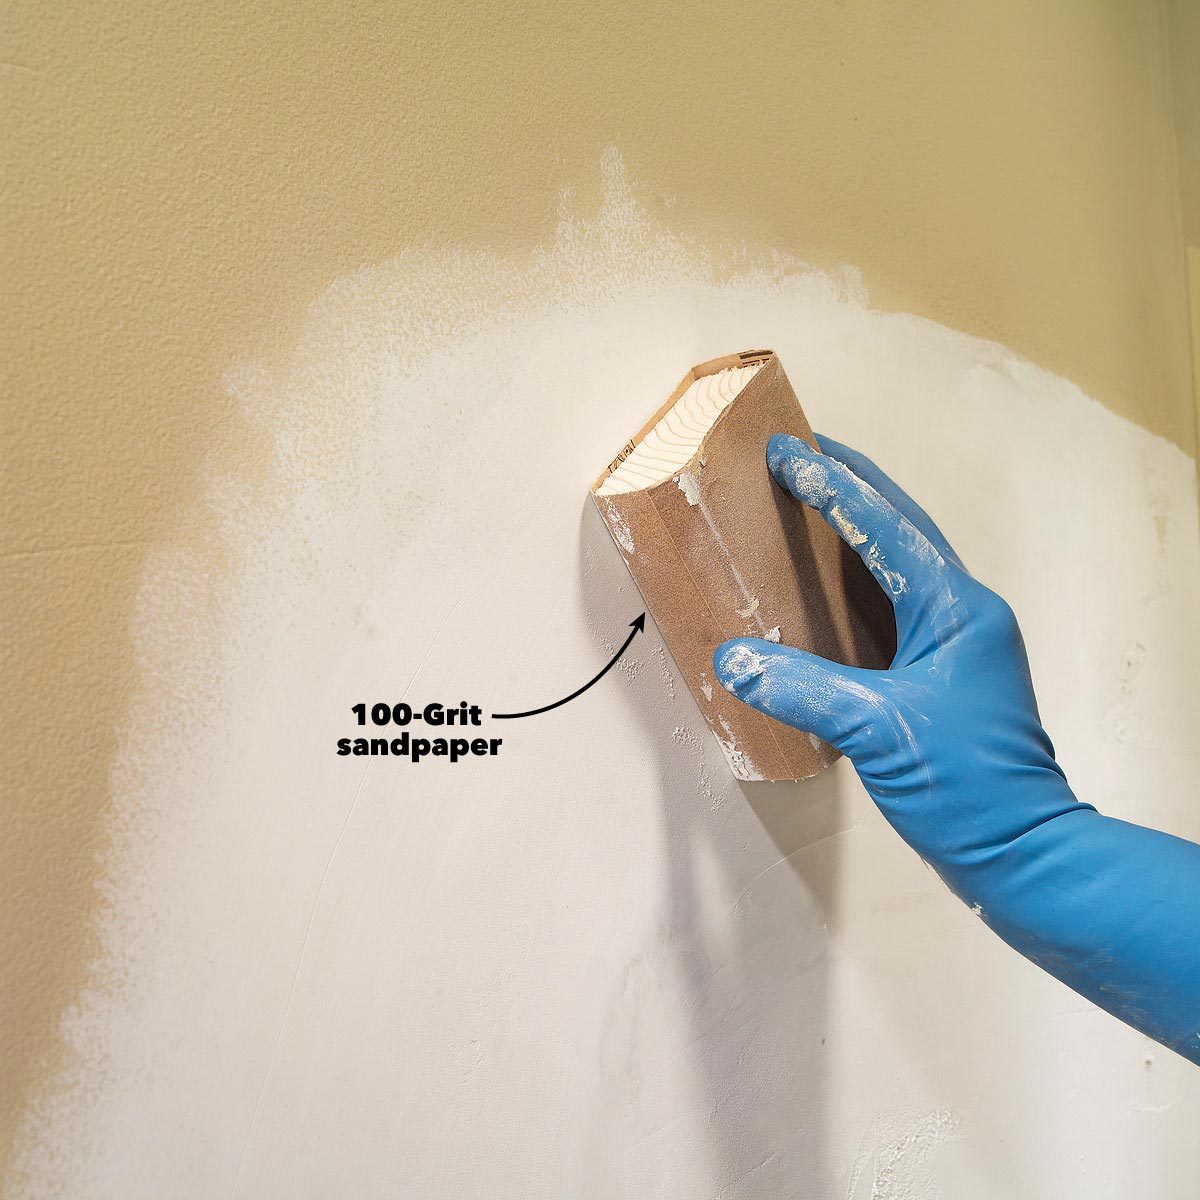 How to Make an Invisible Drywall Patch - Just Needs Paint